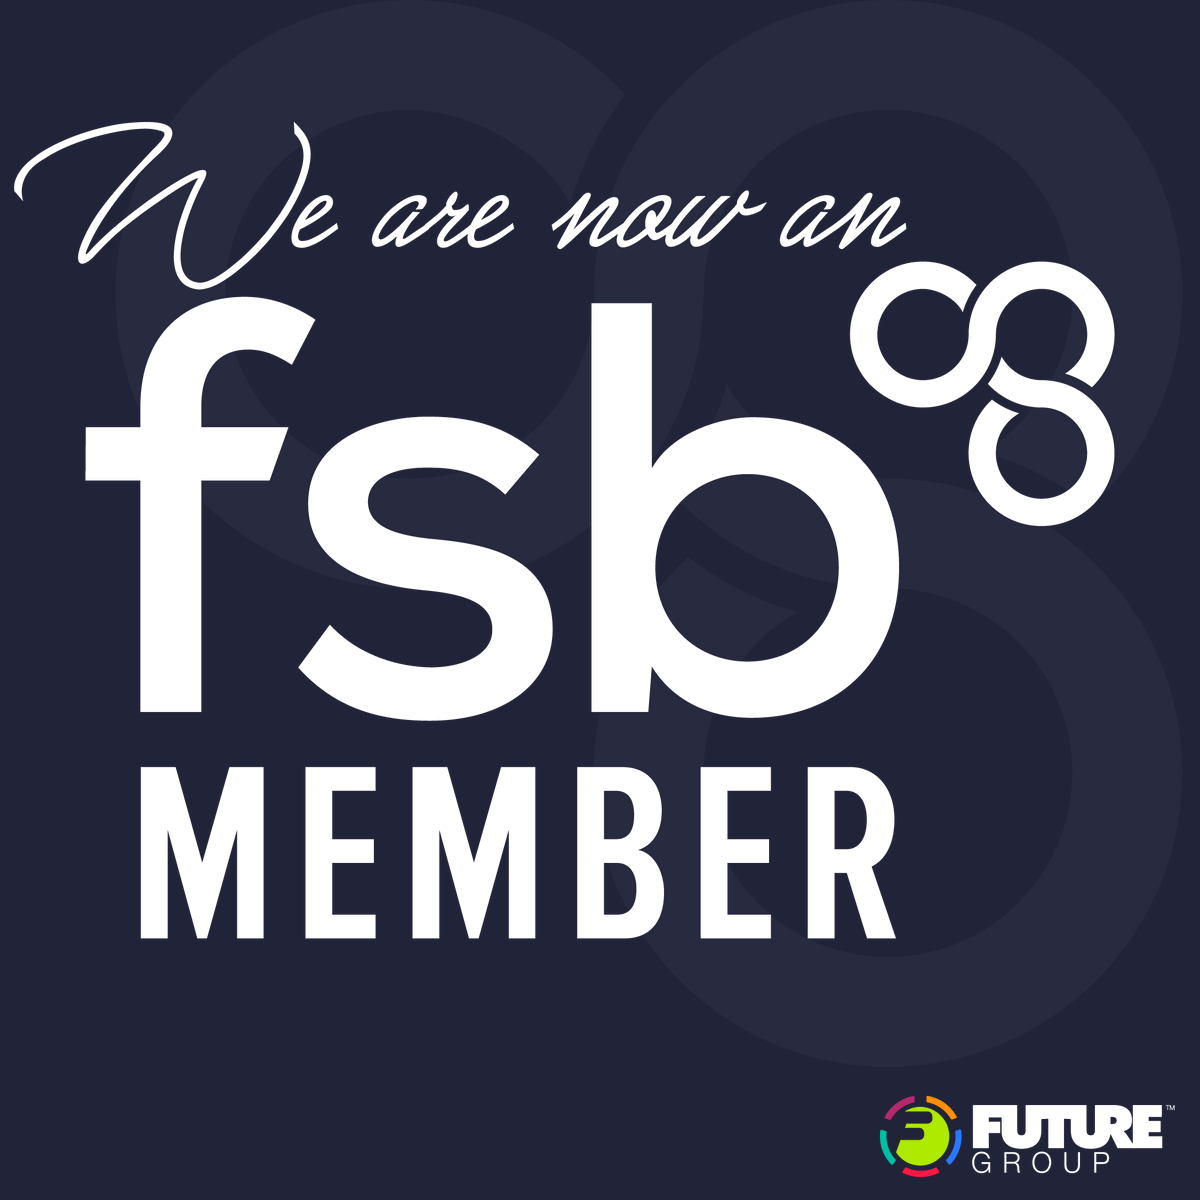 Proud to announce our membership with the Federation of Small Businesses (FSB)! 🤝

Joining forces with a community dedicated to supporting and championing small businesses.

Together, we thrive! 💼🌐

@fsb_policy

#FSBMember #SmallBusinessCommunity